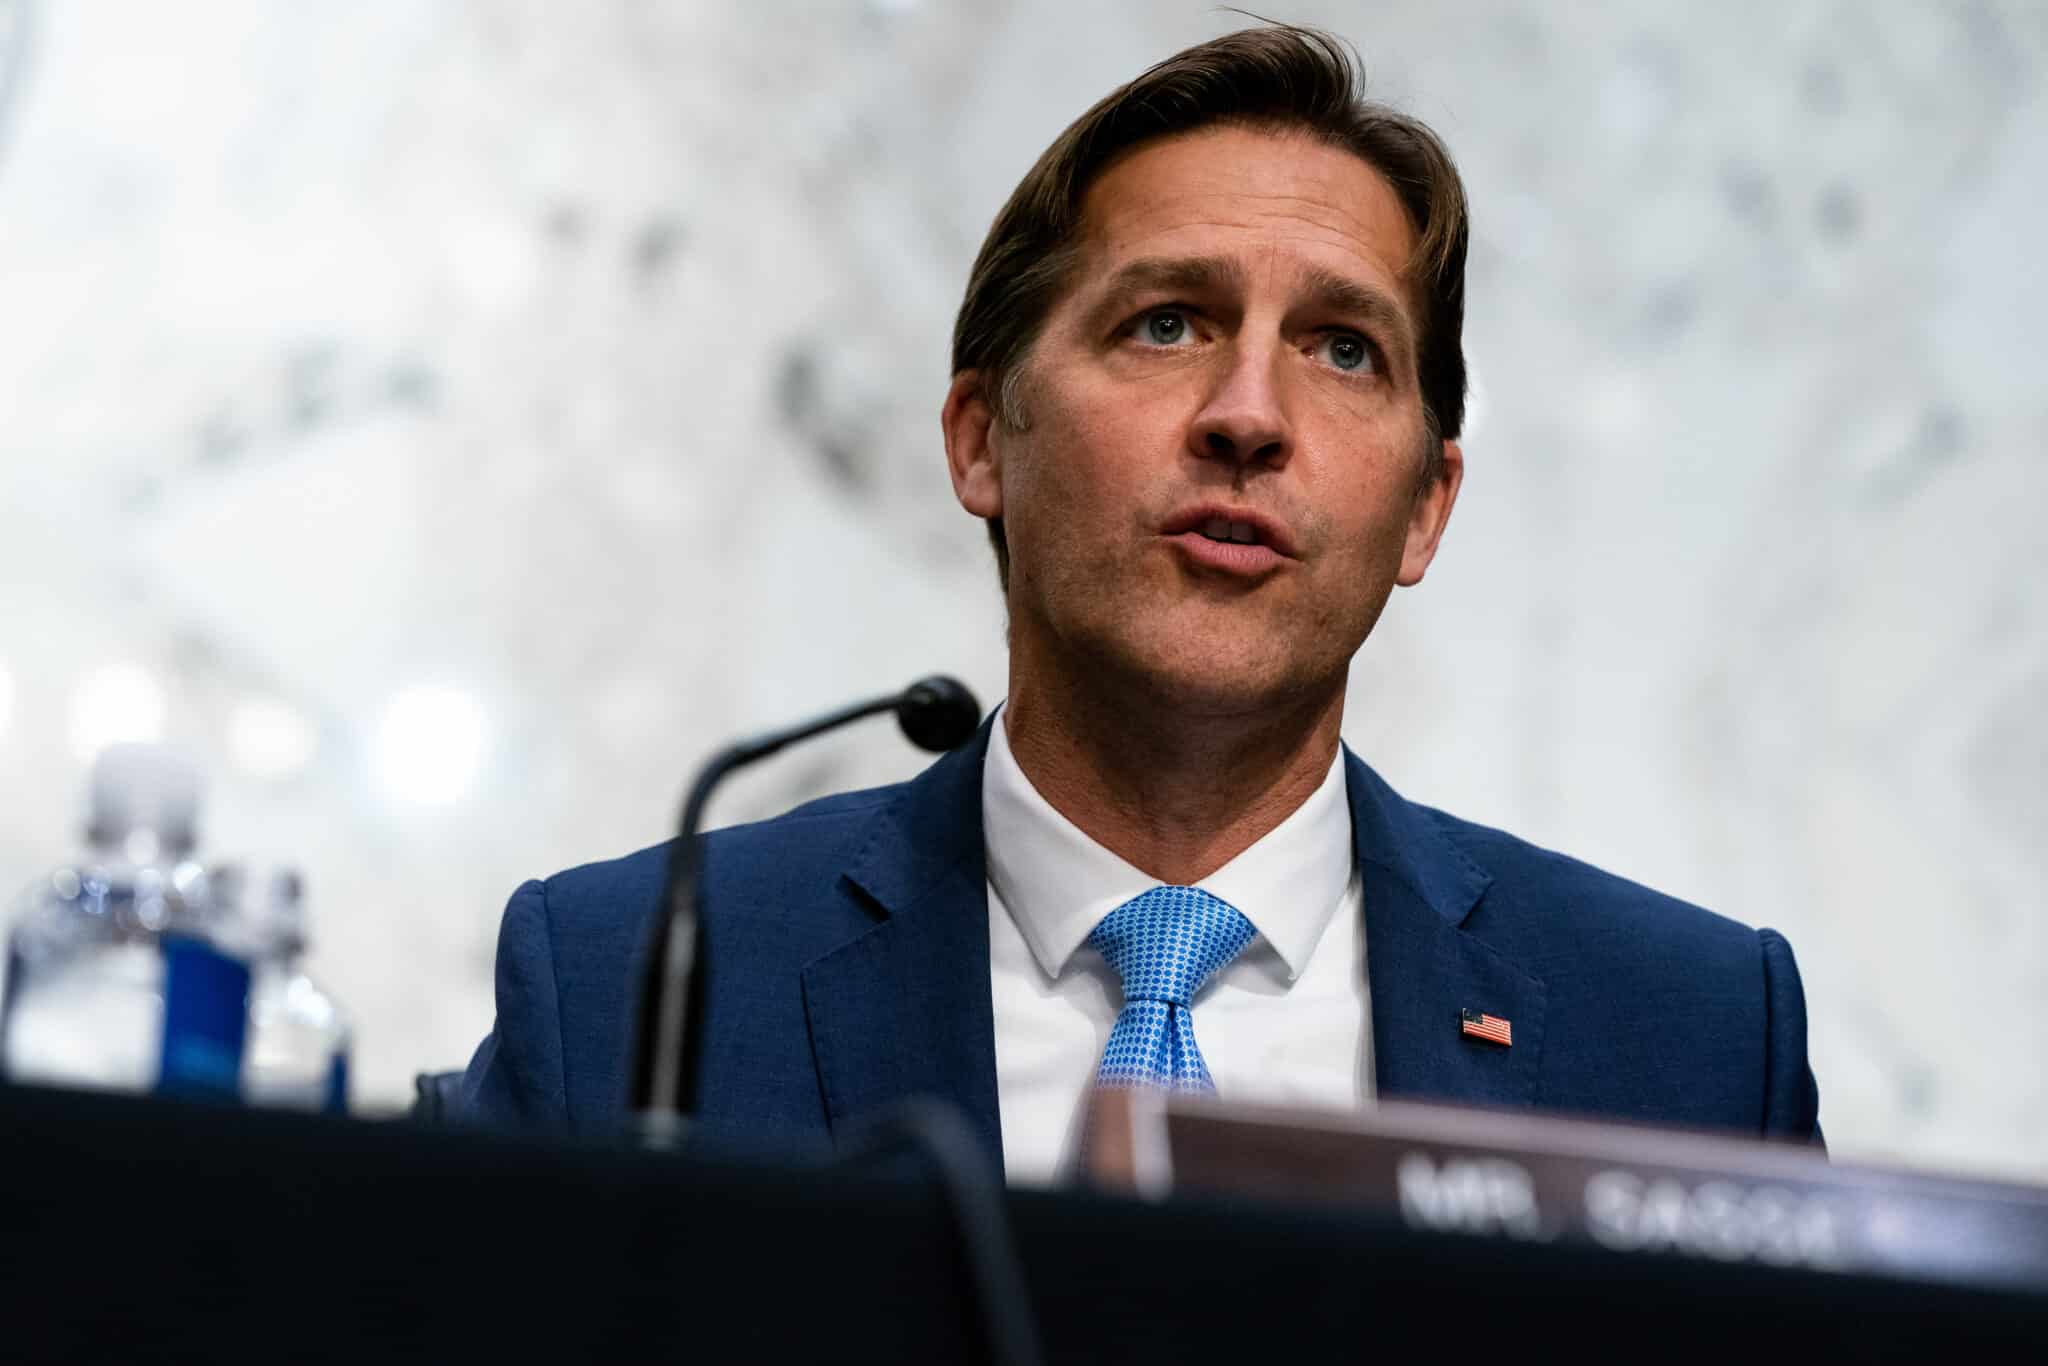 WASHINGTON, DC - OCTOBER 13:  U.S. Sen. Ben Sasse (R-NE) speaks while Supreme Court nominee Judge Amy Coney Barrett testifies before the Senate Judiciary Committee on the second day of her Supreme Court confirmation hearing on Capitol Hill on October 13, 2020 in Washington, DC. Barrett was nominated by President Donald Trump to fill the vacancy left by Justice Ruth Bader Ginsburg who passed away in September. (Anna Moneymaker-Pool/Getty Images)